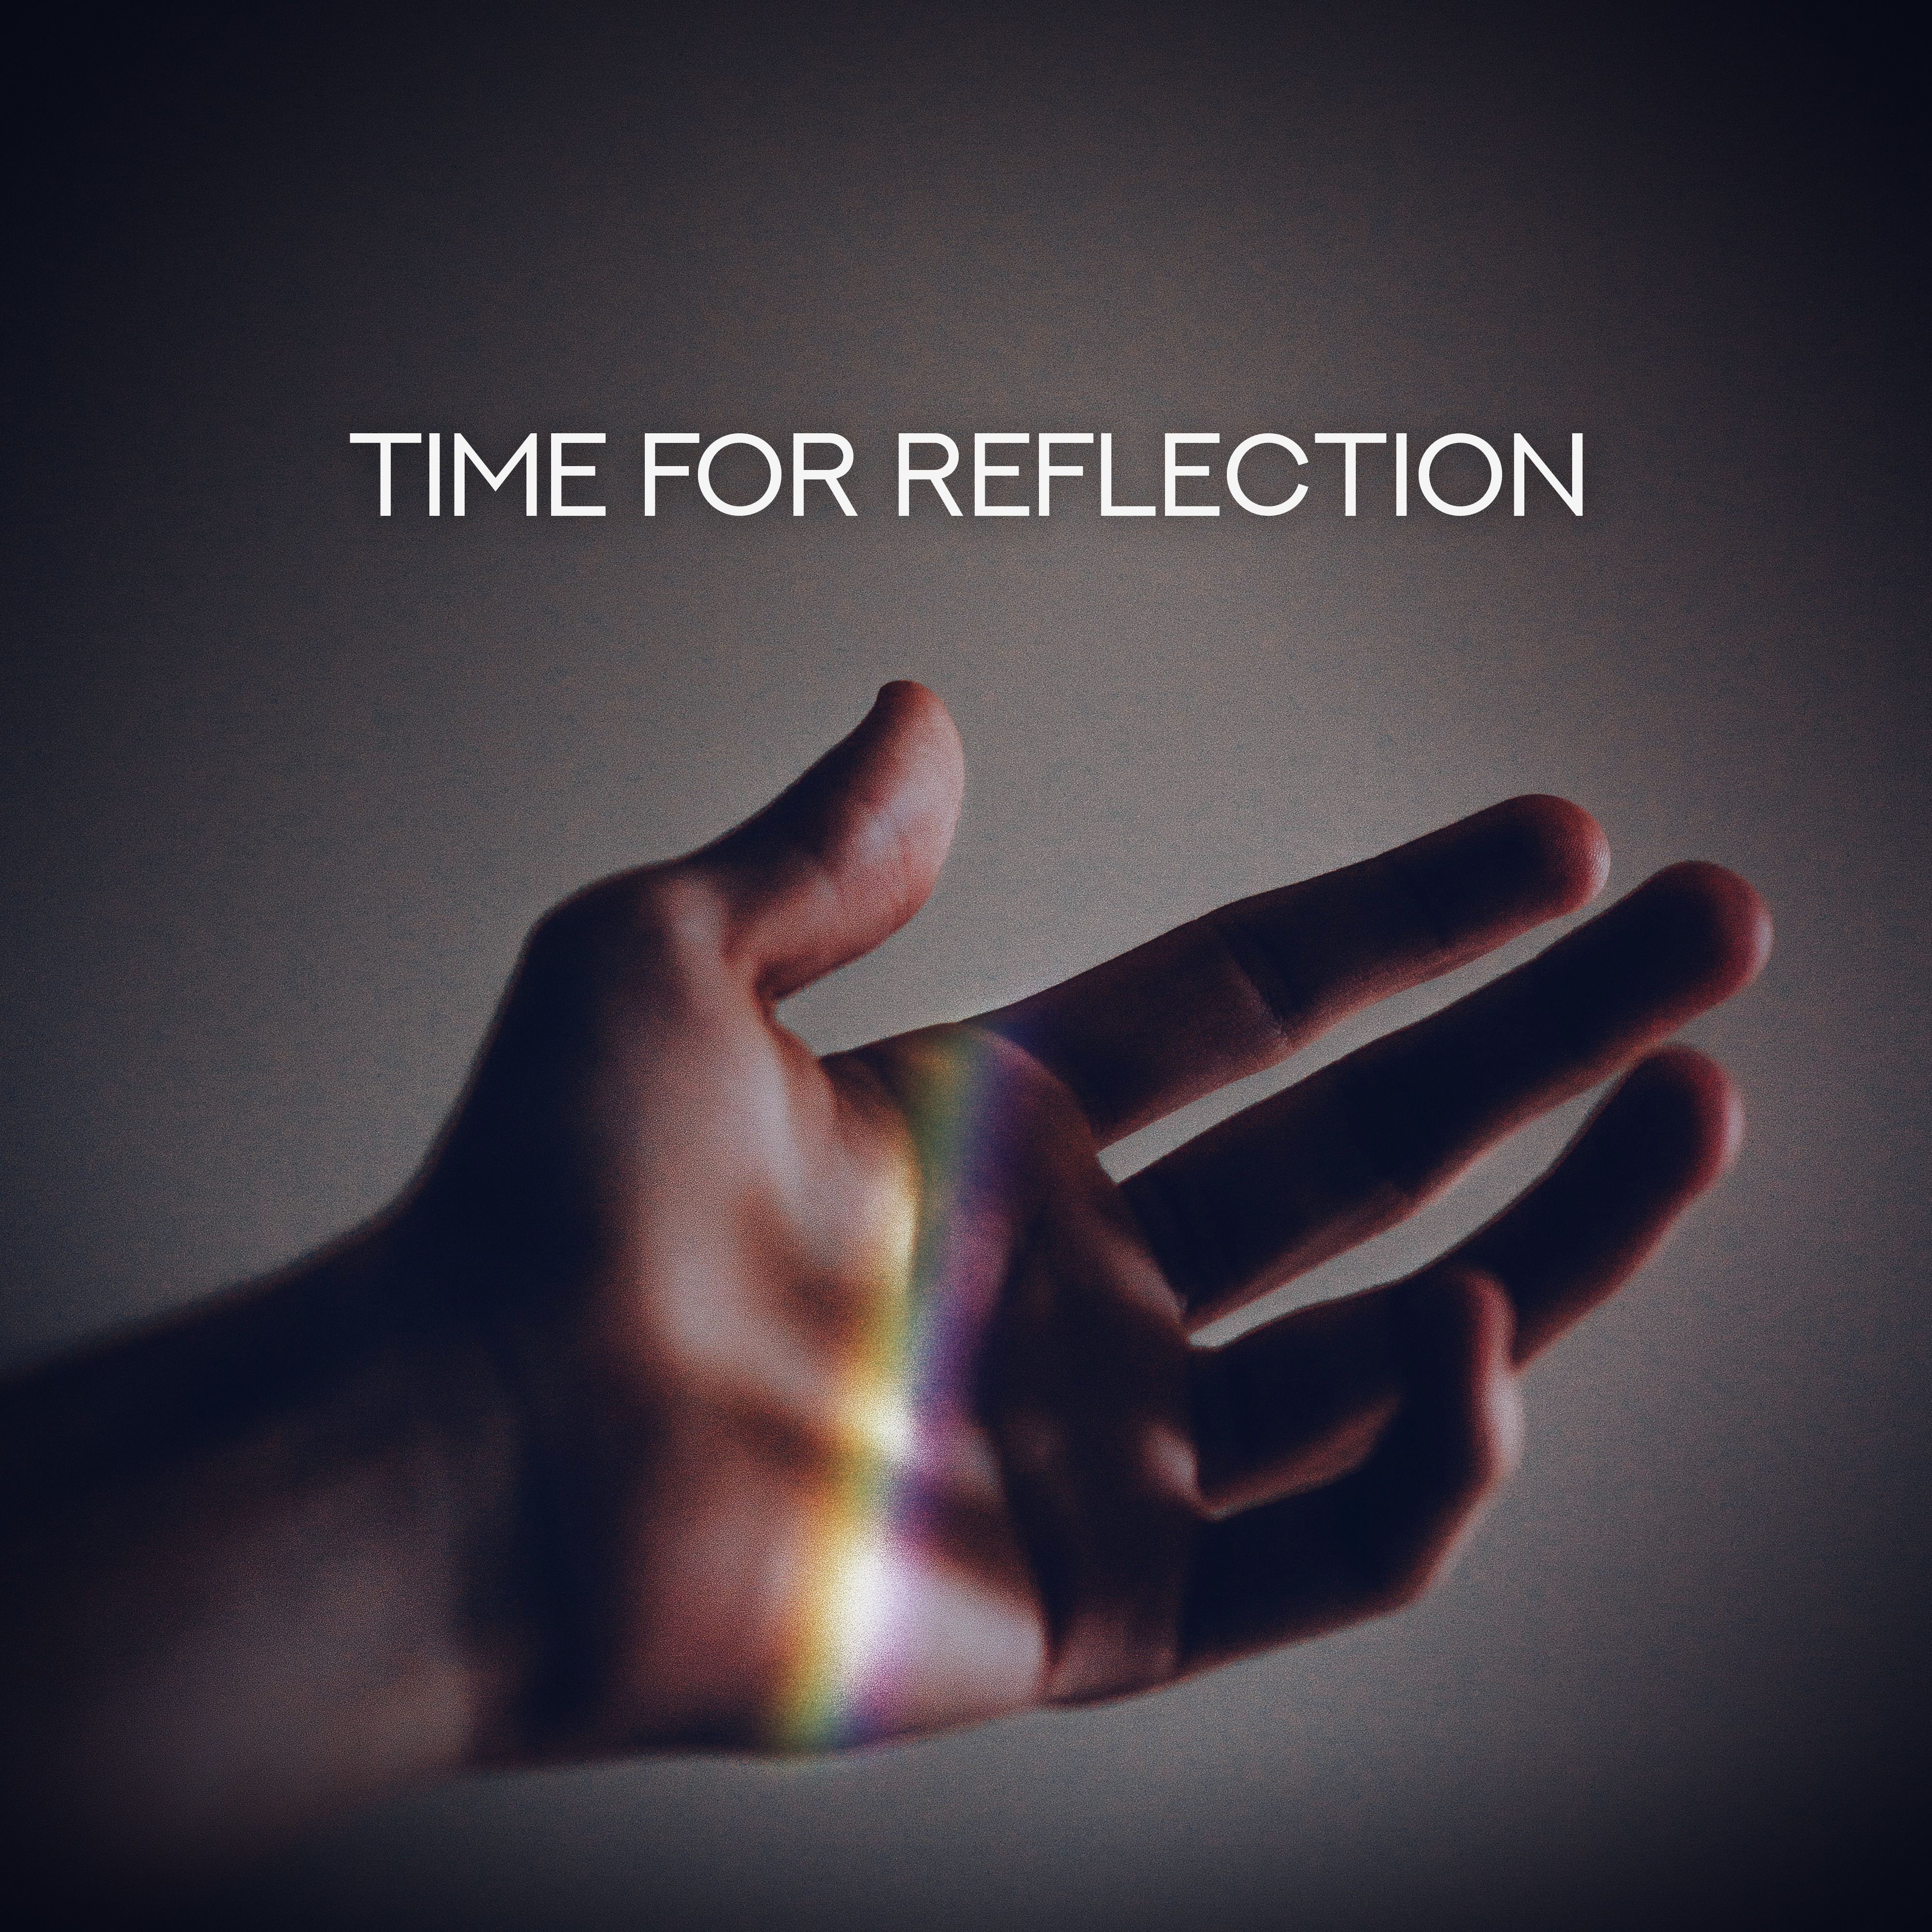 Time for Reflection – Music for Spiritual Contemplation